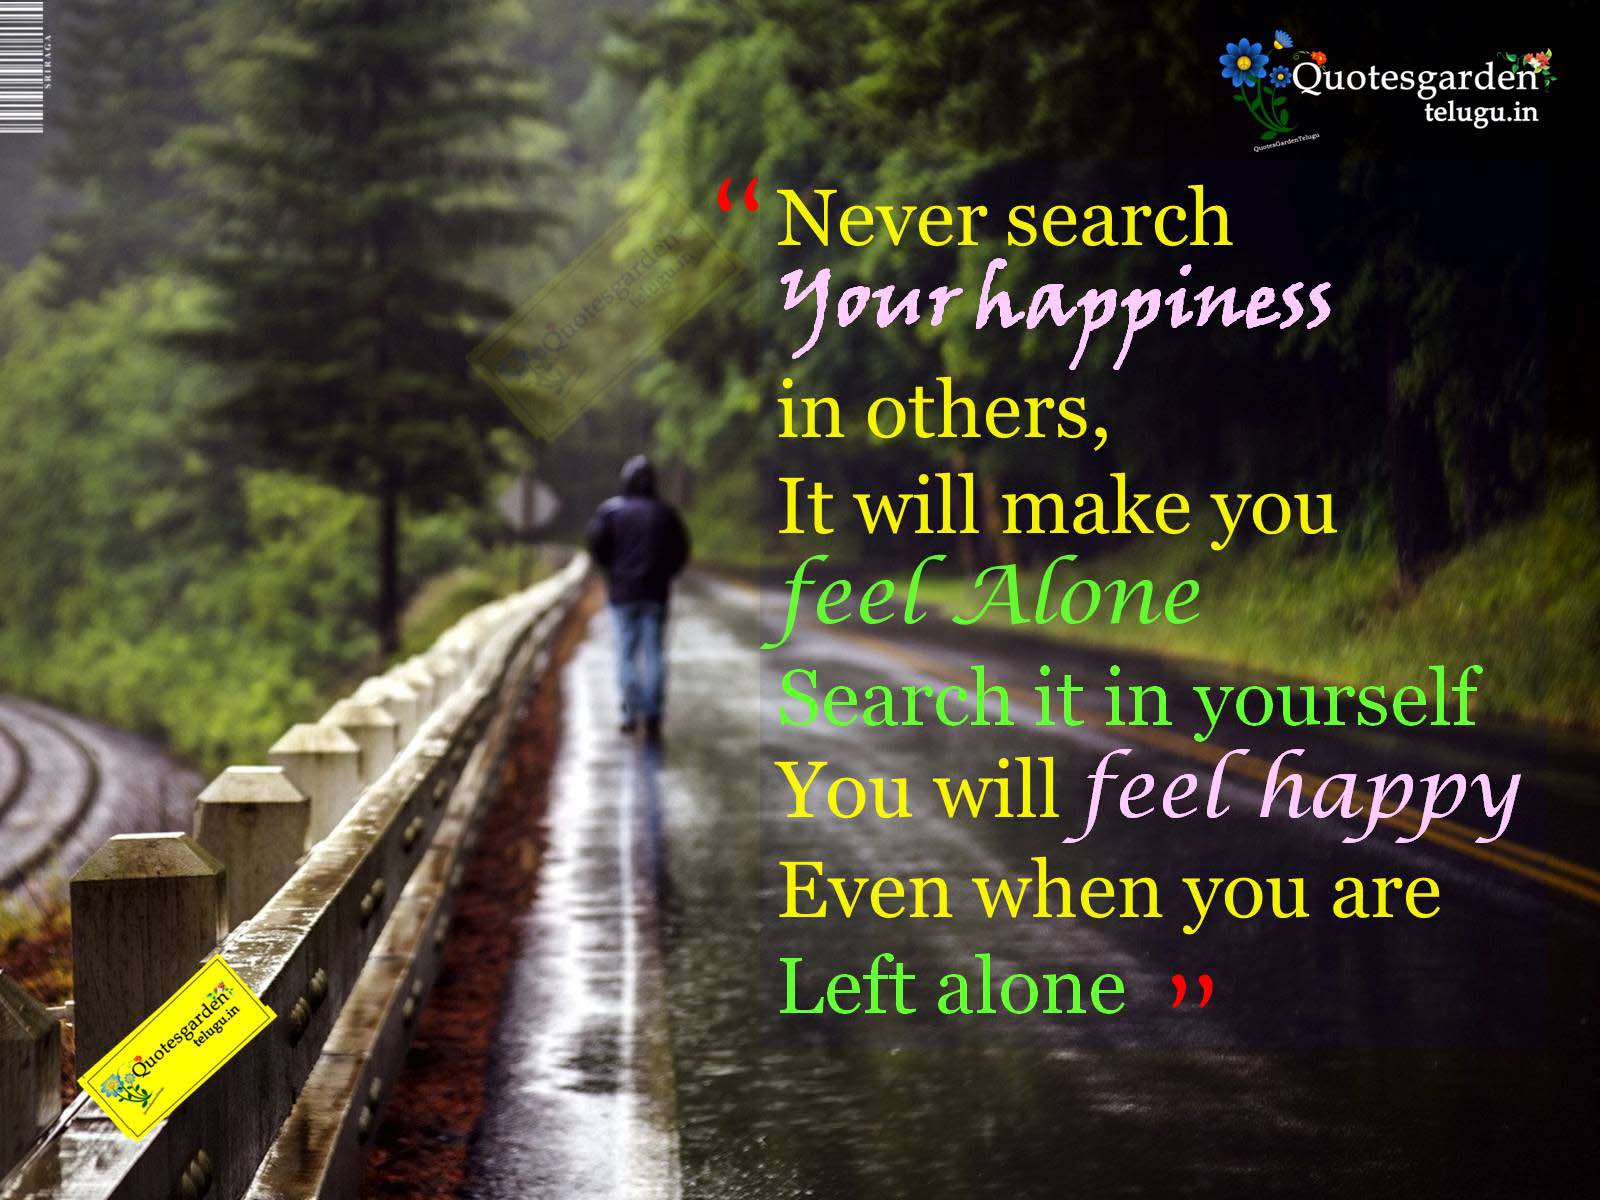 Best inspirational quotes about life happiness and lonelyness | QUOTES ...